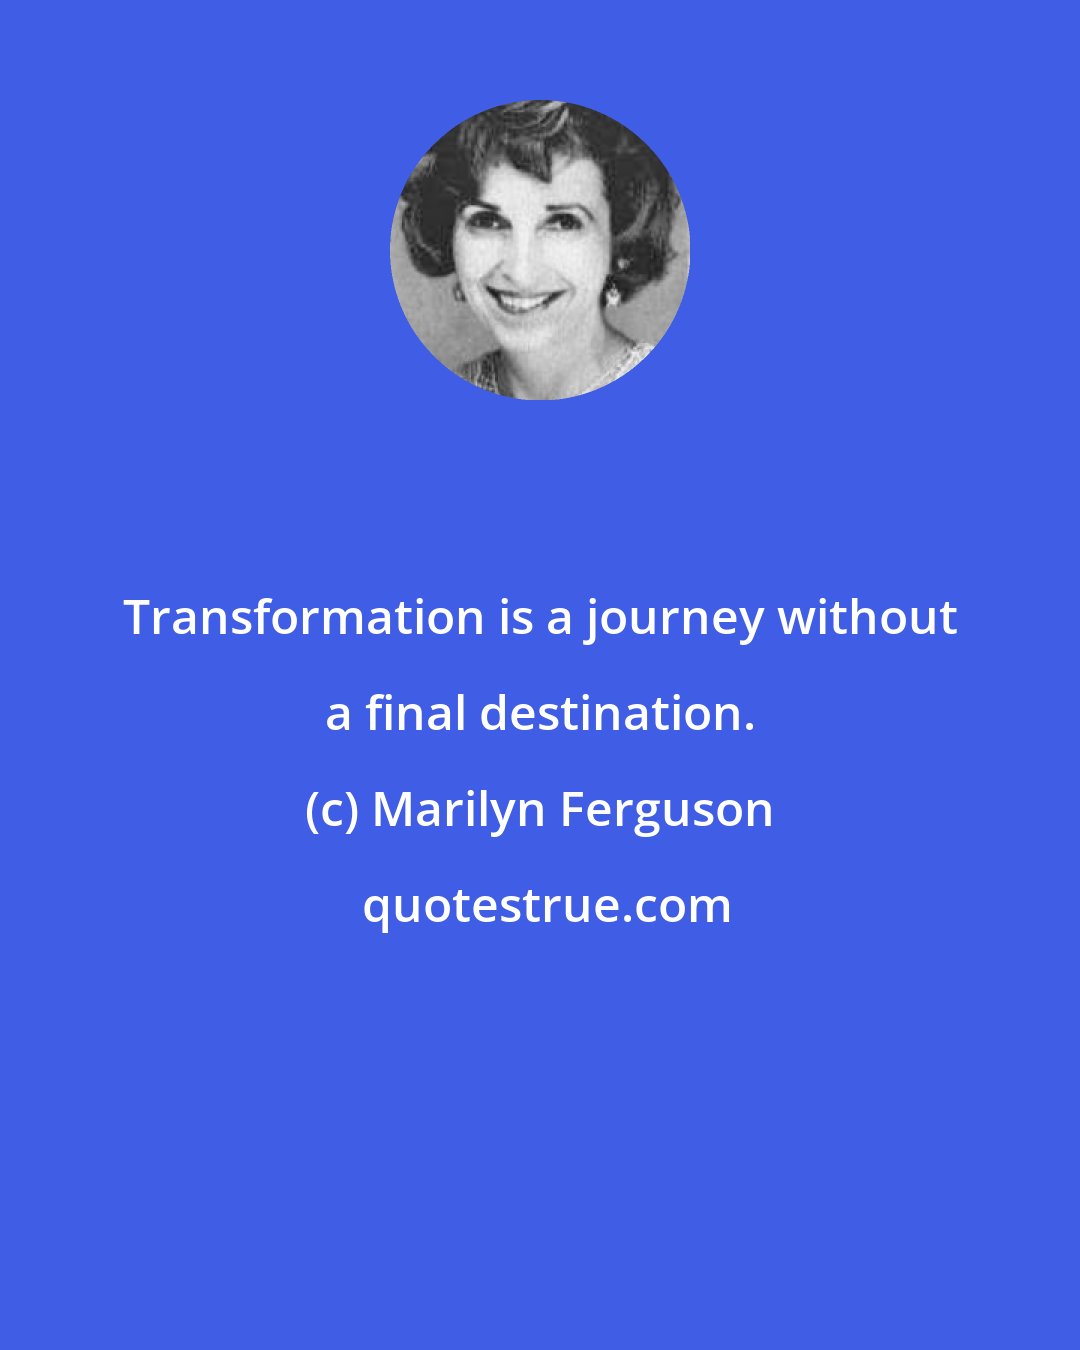 Marilyn Ferguson: Transformation is a journey without a final destination.